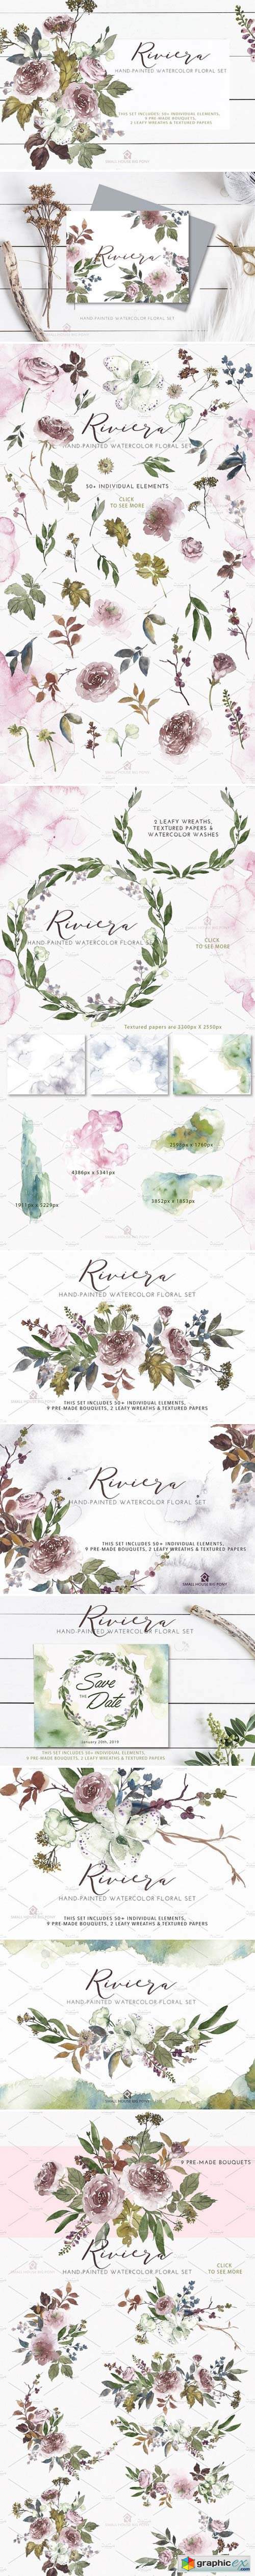 Riviera - Hand-painted Watercolor